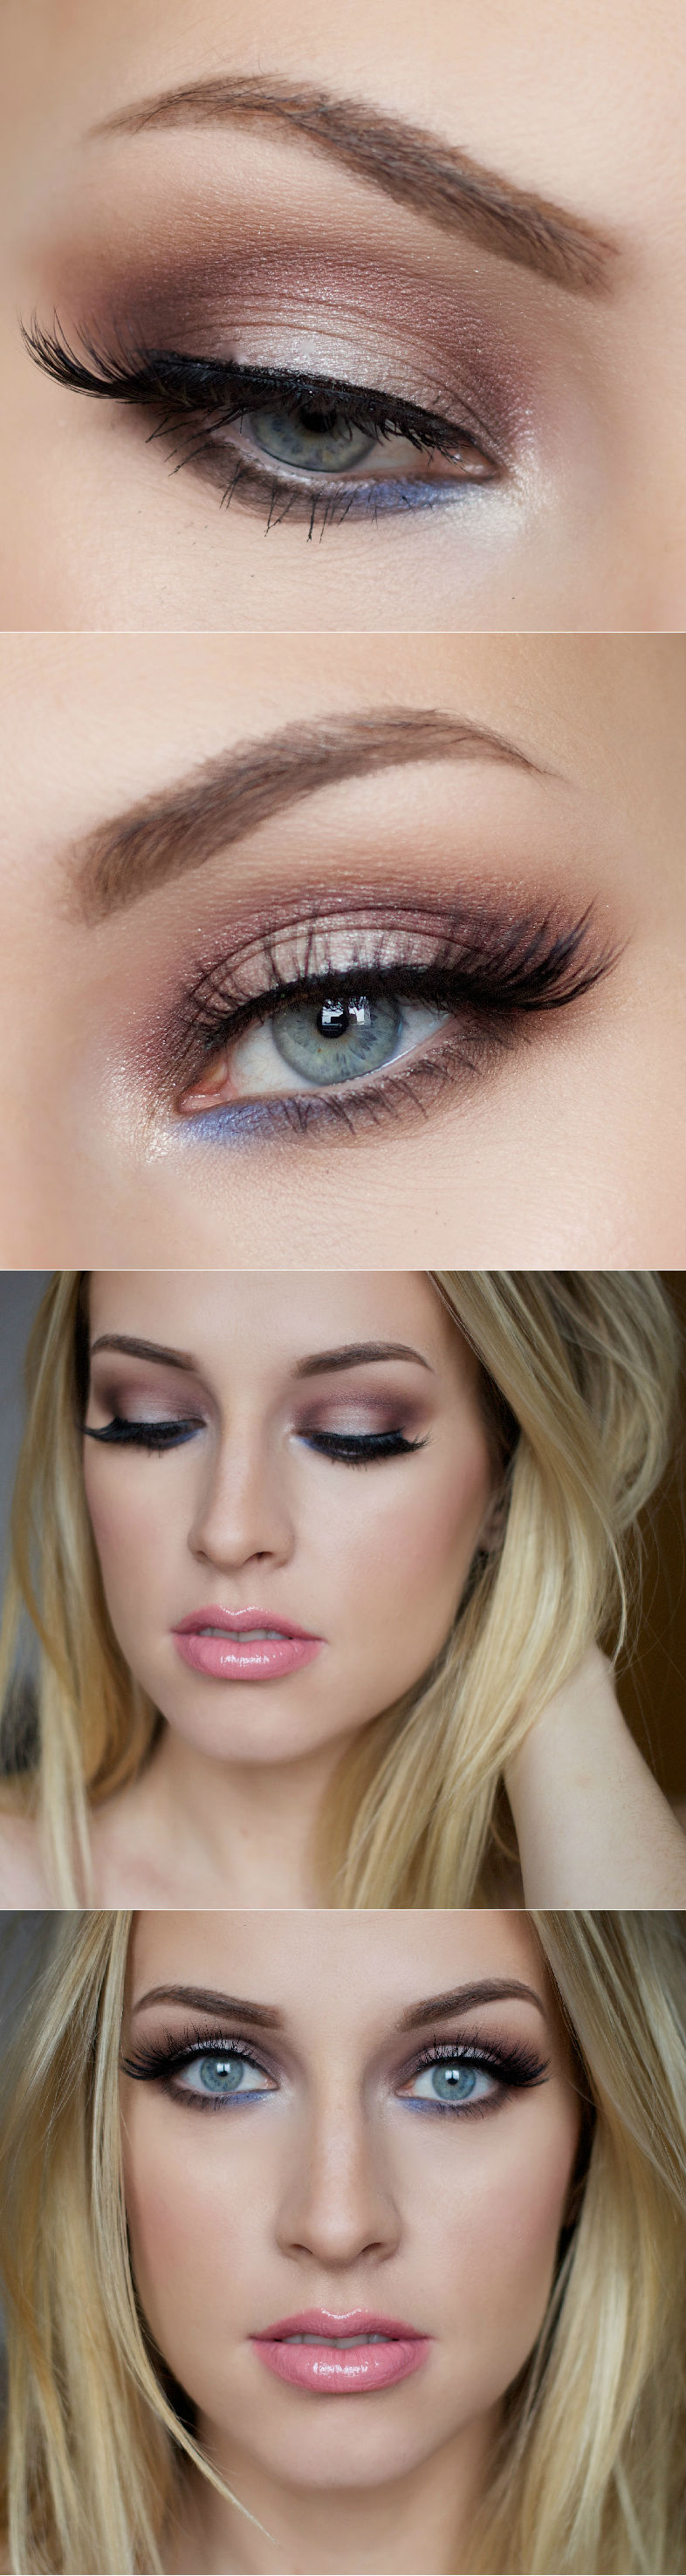 Homecoming Makeup For Brown Eyes 5 Ways To Make Blue Eyes Pop With Proper Eye Makeup Her Style Code